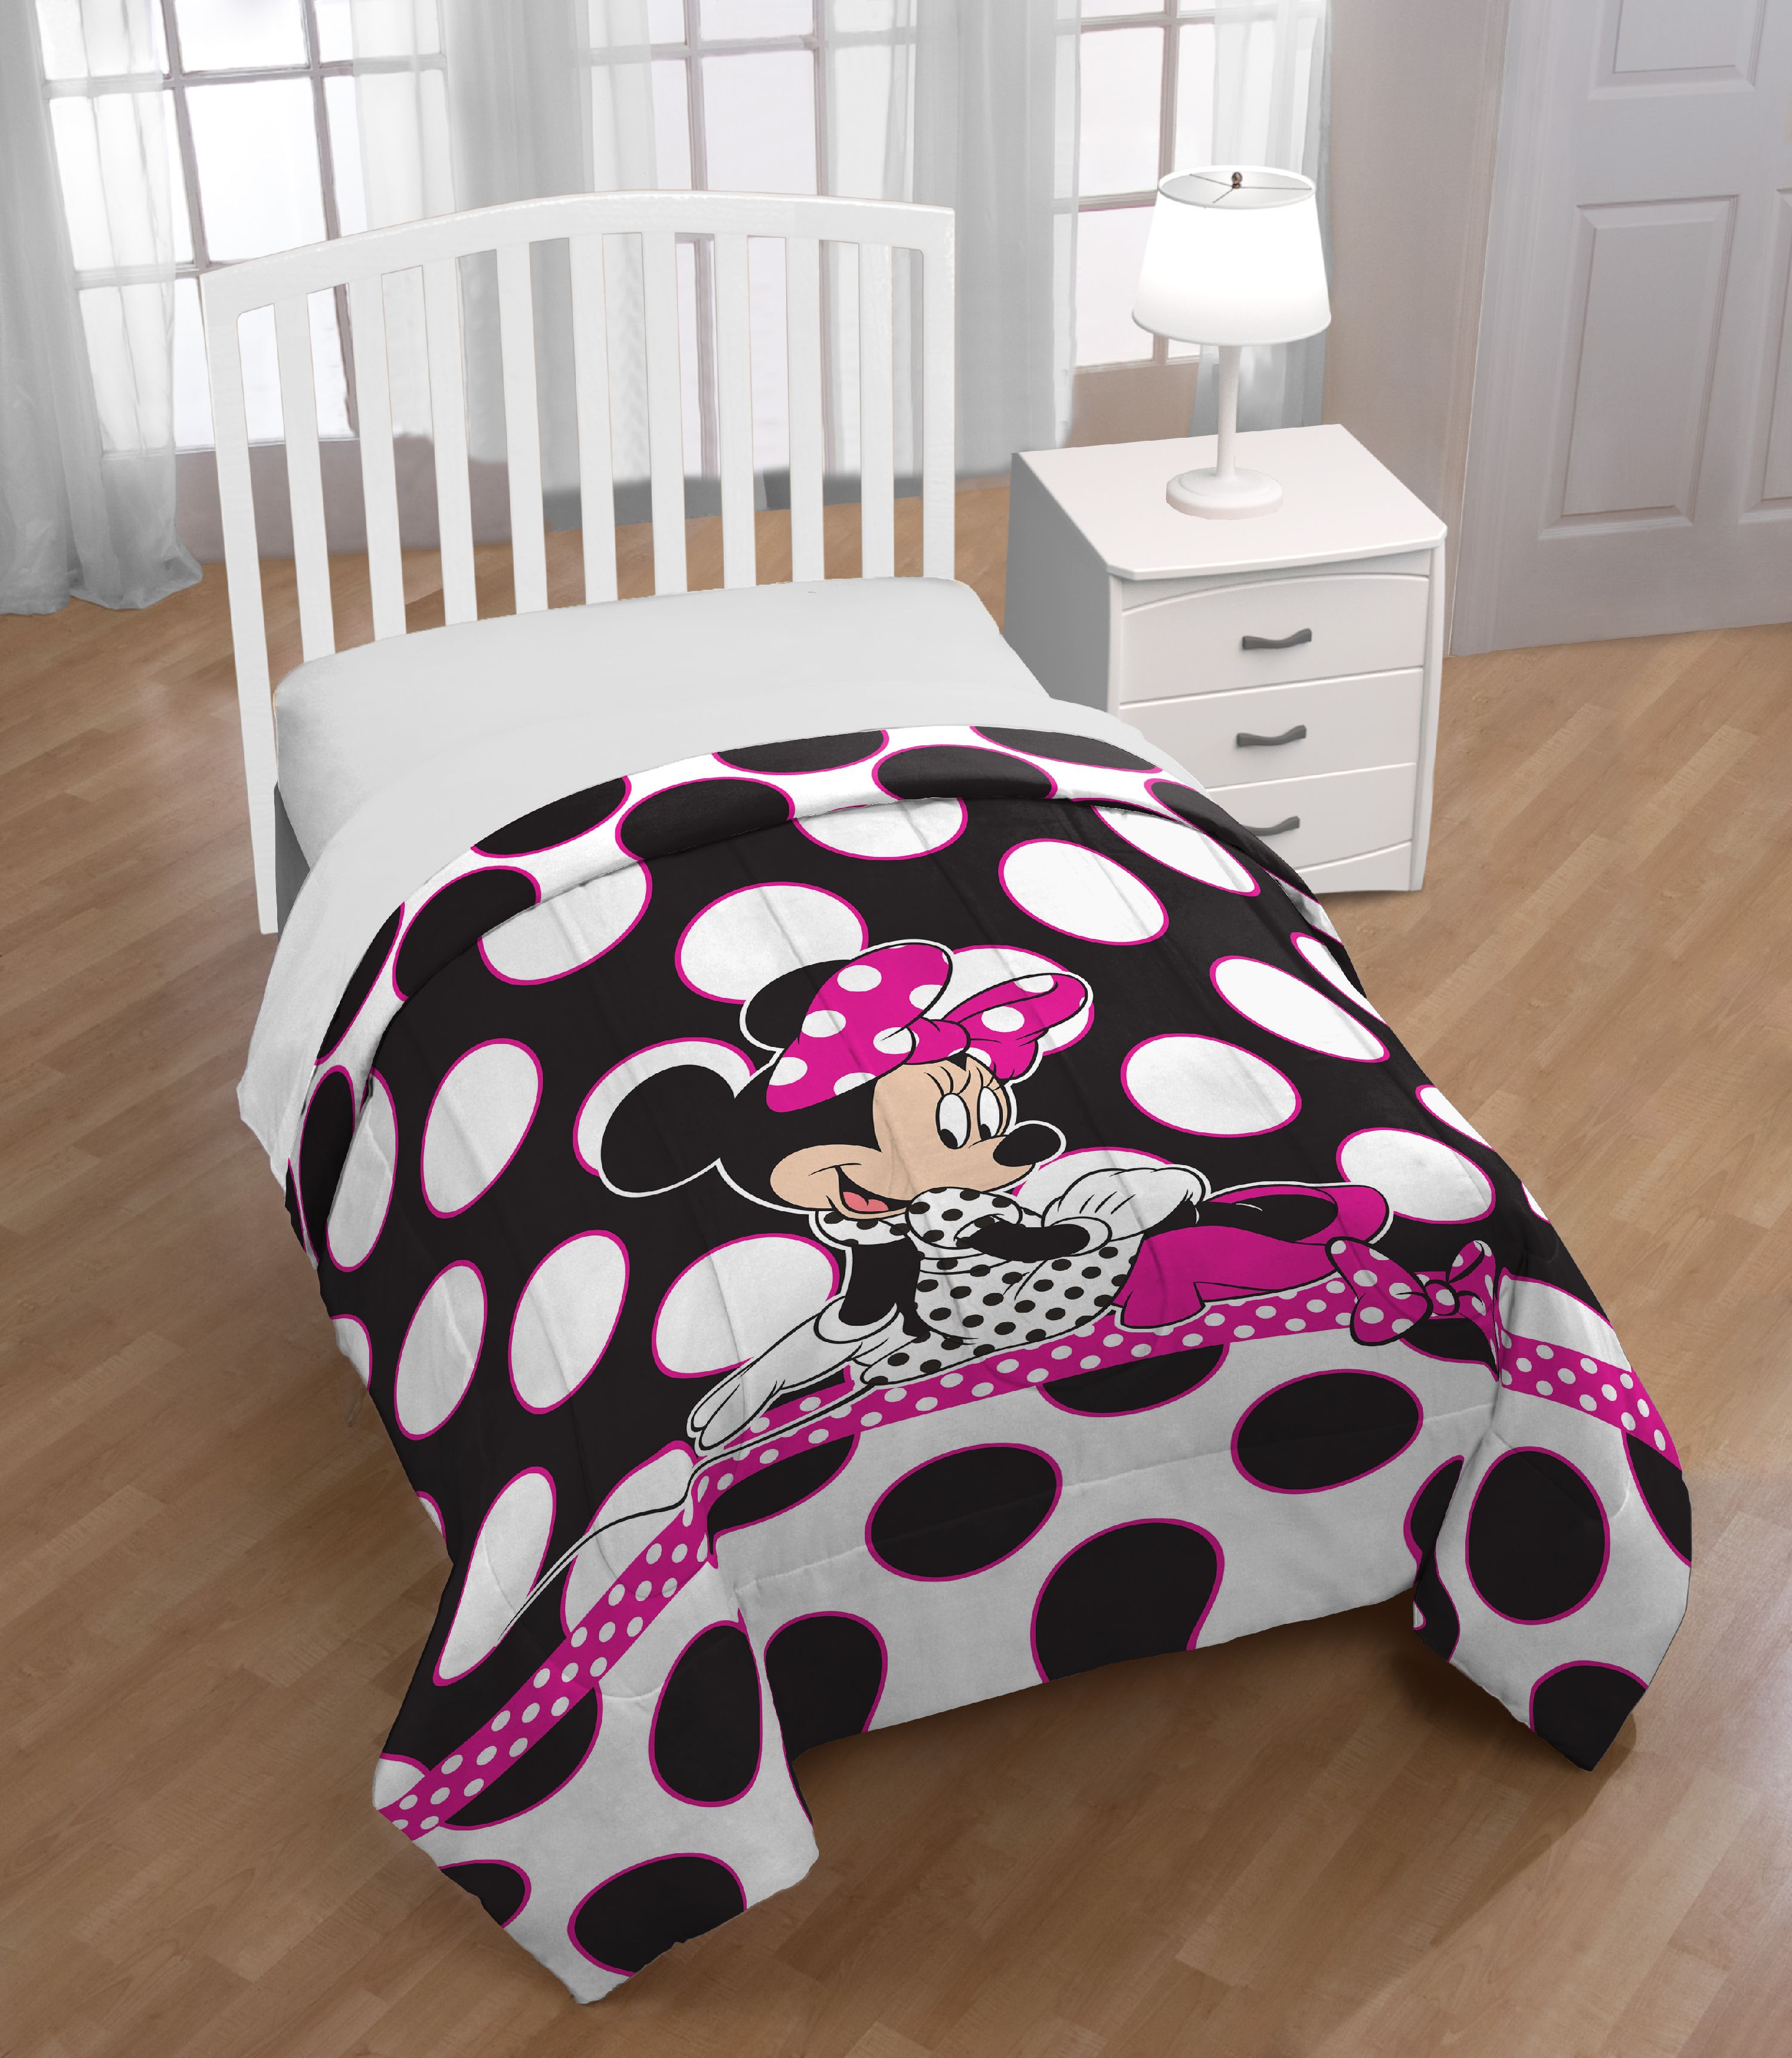 Minnie Mouse Reversible Twin/Full Comforter - image 1 of 3